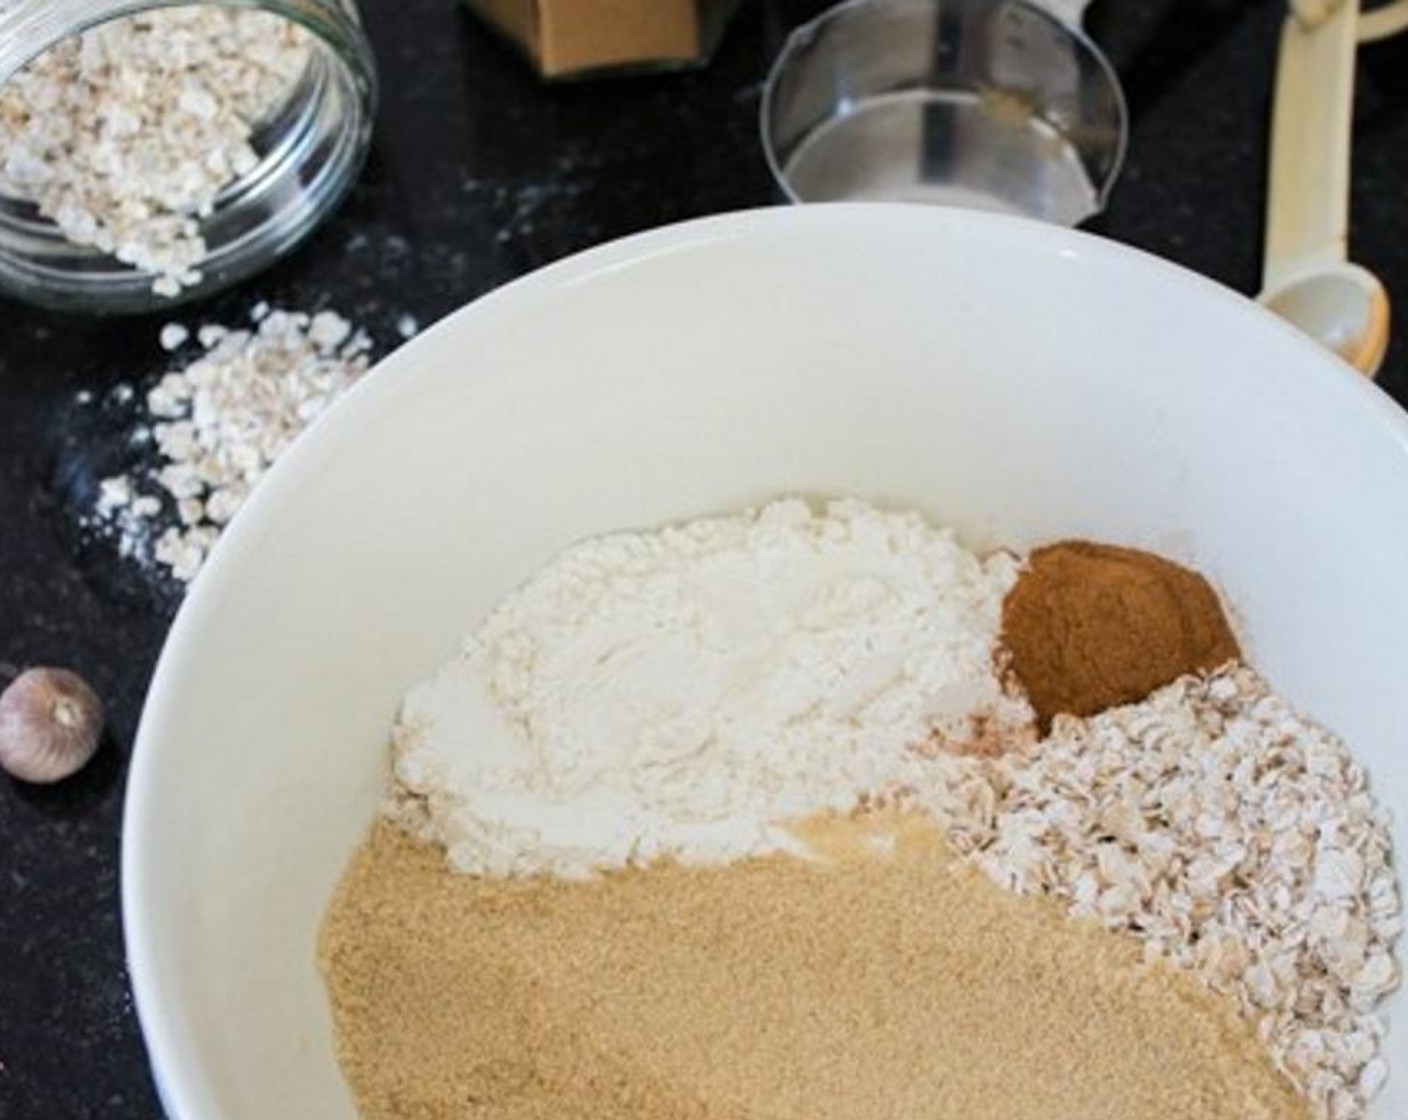 step 2 Then get the crisp topping mixture ready. Combine All-Purpose Flour (1/4 cup), Oats (1/2 cup), Brown Sugar (1/2 cup), Ground Cinnamon (1/2 tsp), and Ground Nutmeg (1 pinch) in a mixing bowl.